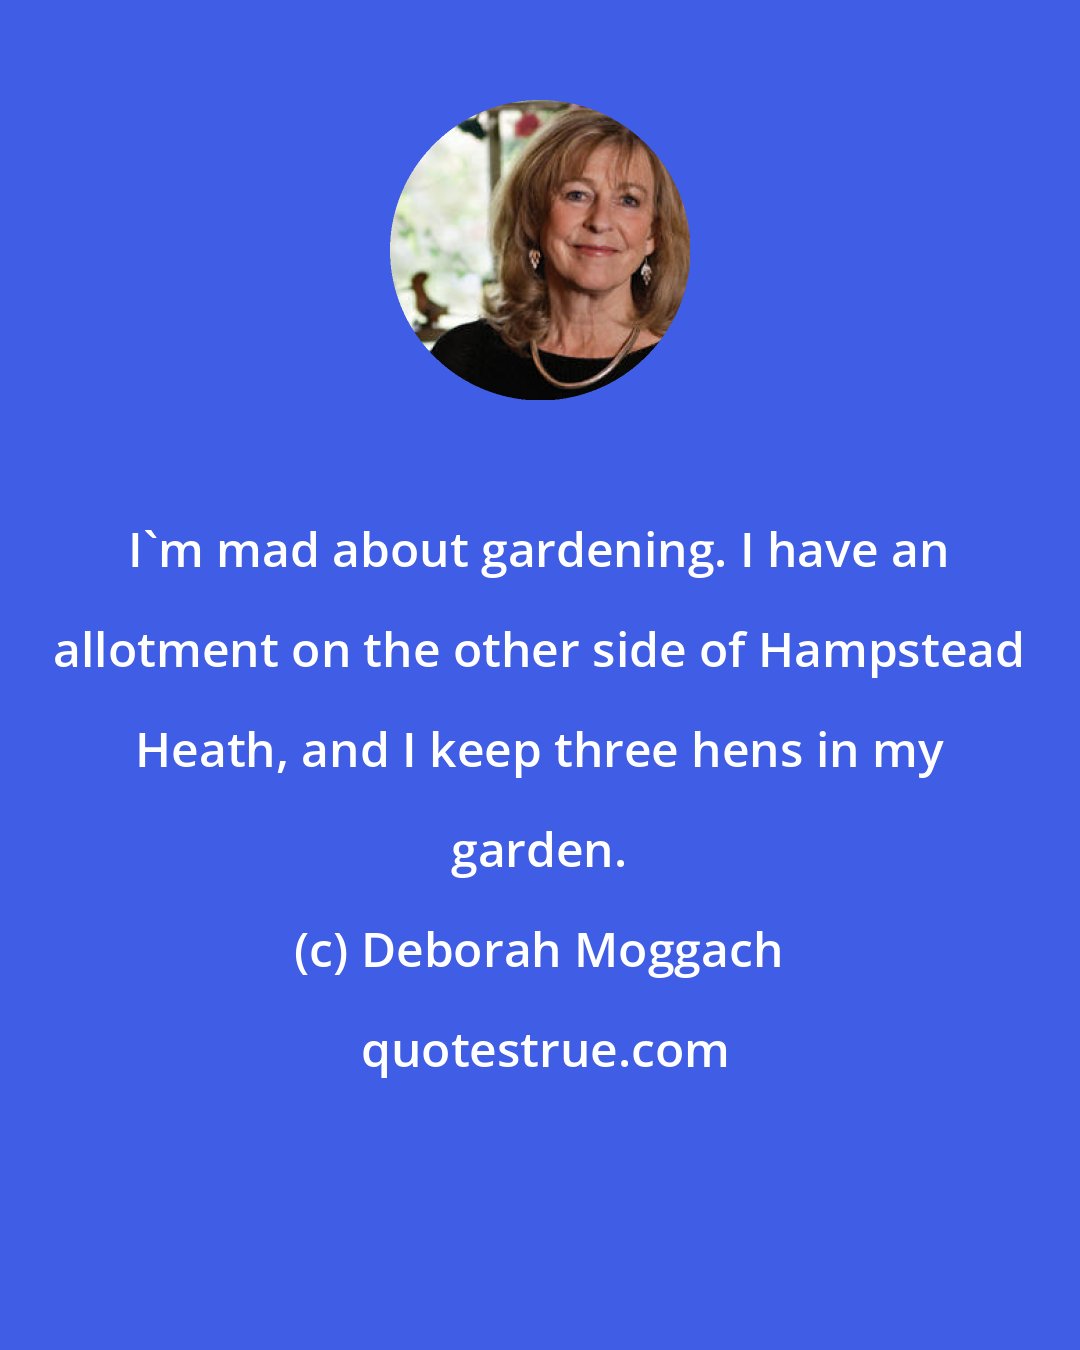 Deborah Moggach: I'm mad about gardening. I have an allotment on the other side of Hampstead Heath, and I keep three hens in my garden.